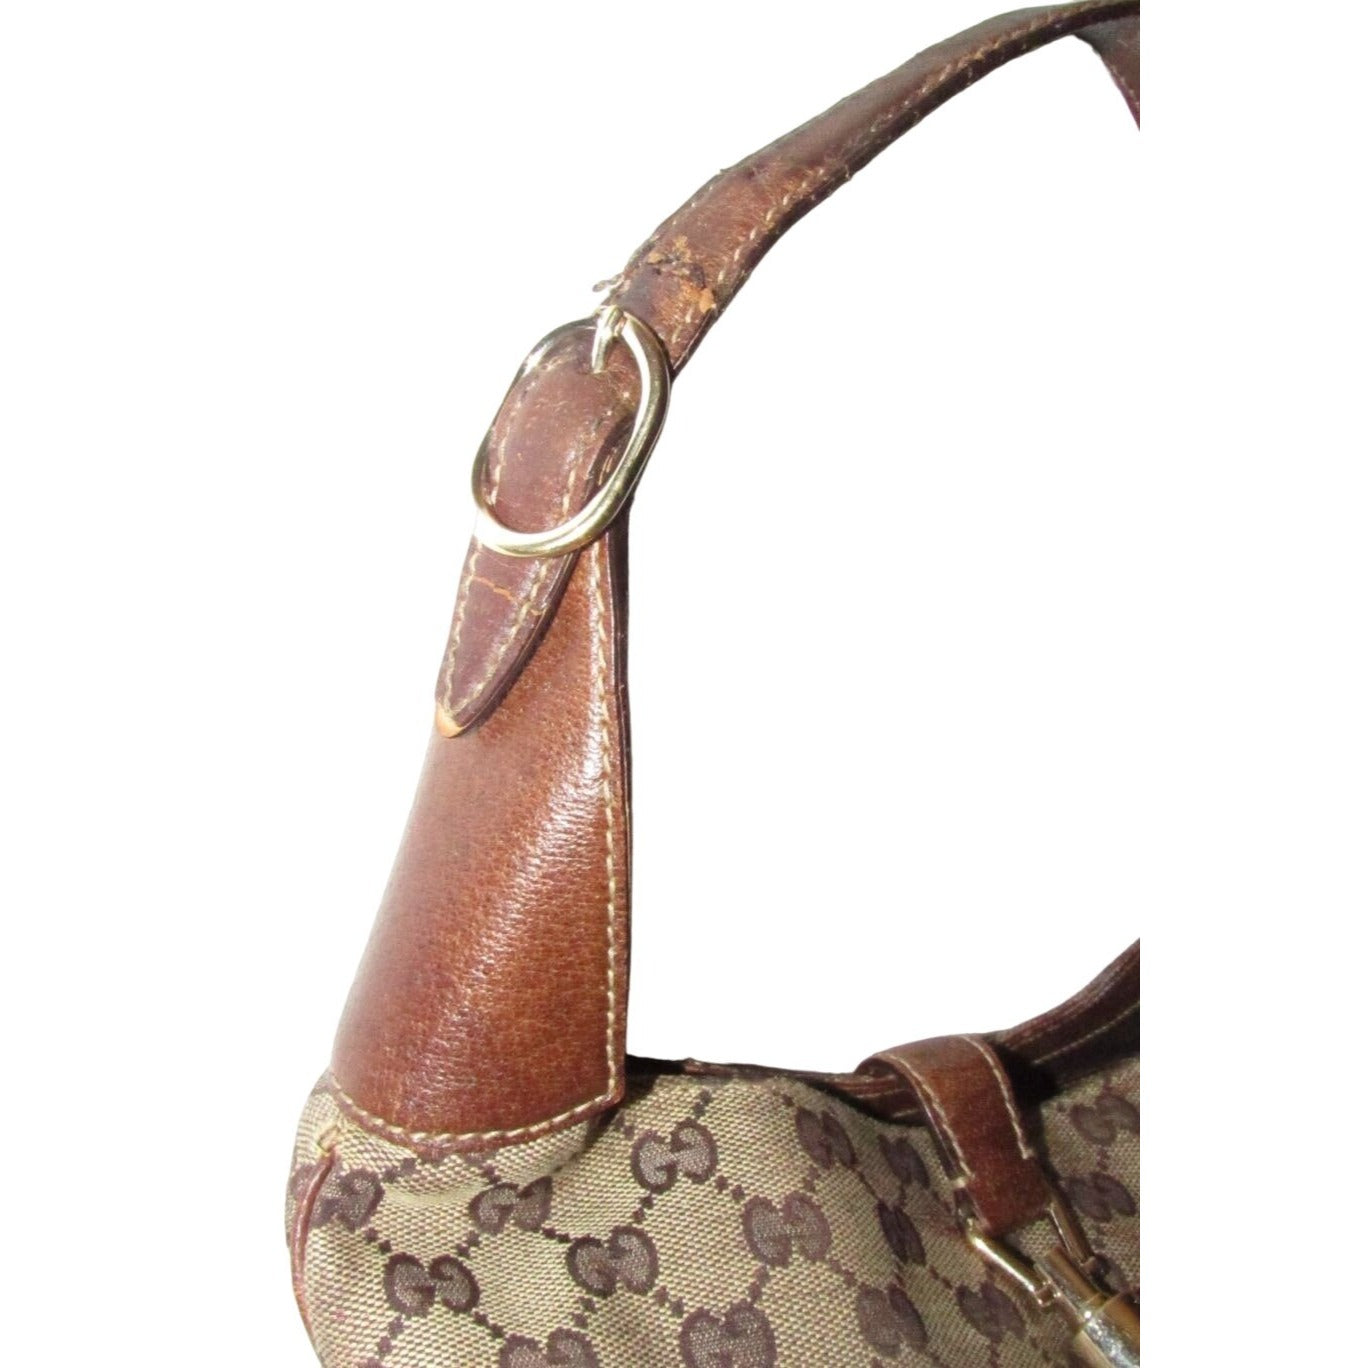 Vintage Gucci, brown Guccissima print fabric and leather, Jackie style shoulder bag with a gold piston clasp!